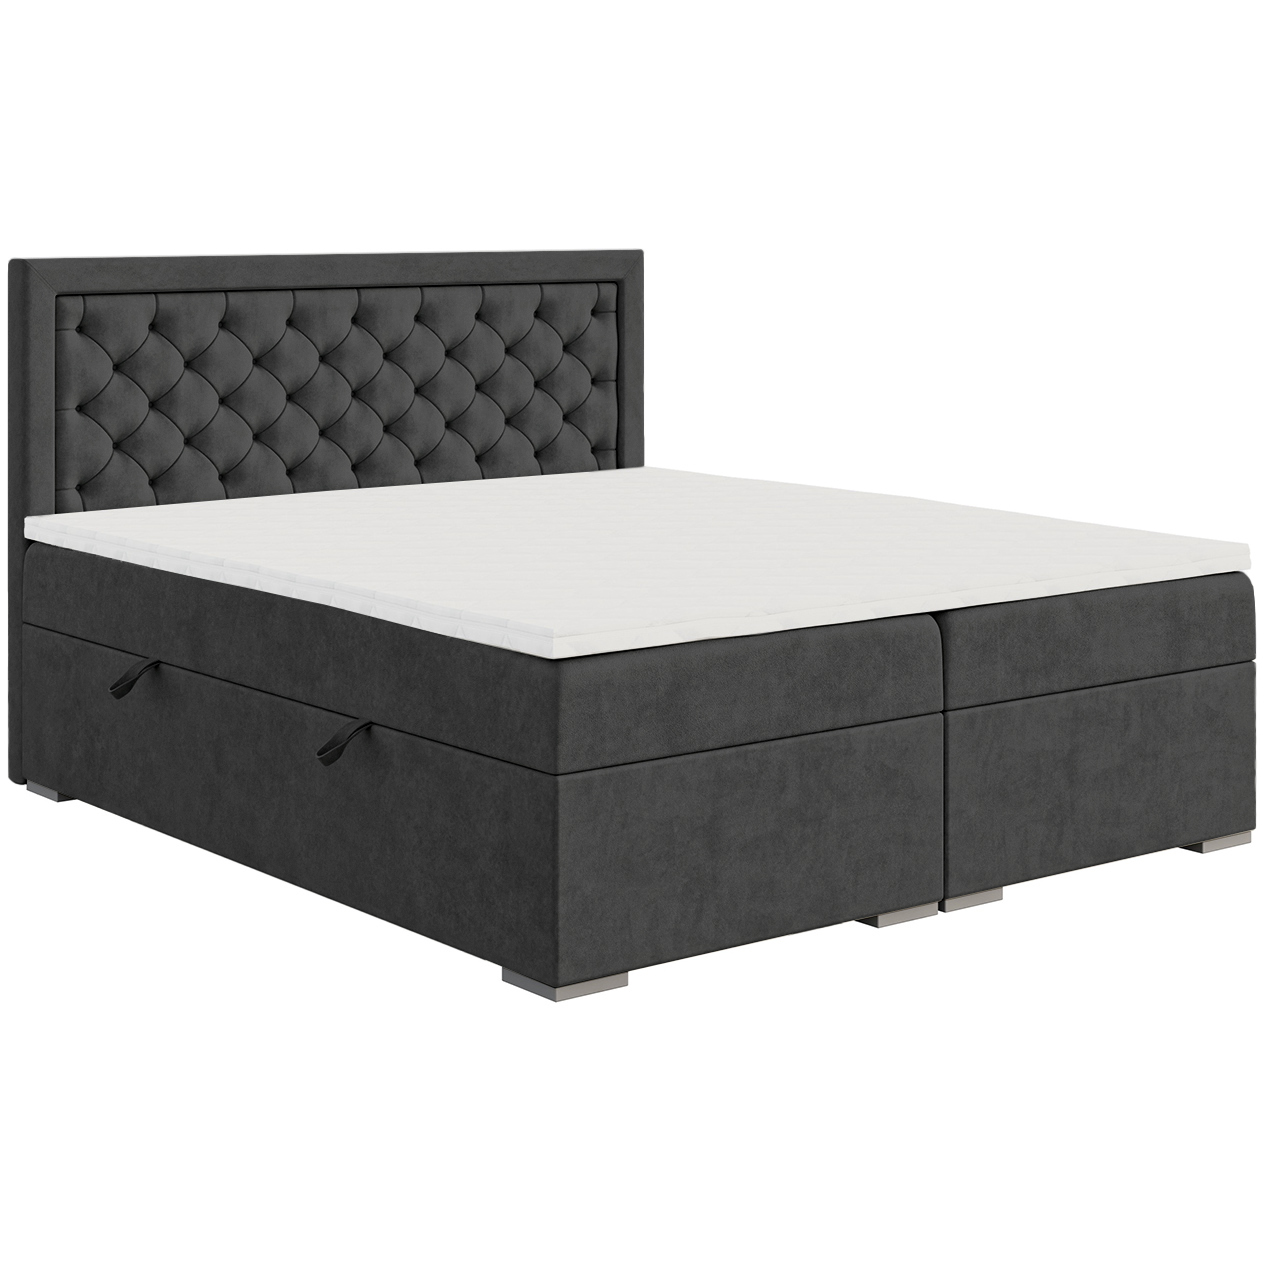 Upholstered bed BLUM 180x200 monolith 92